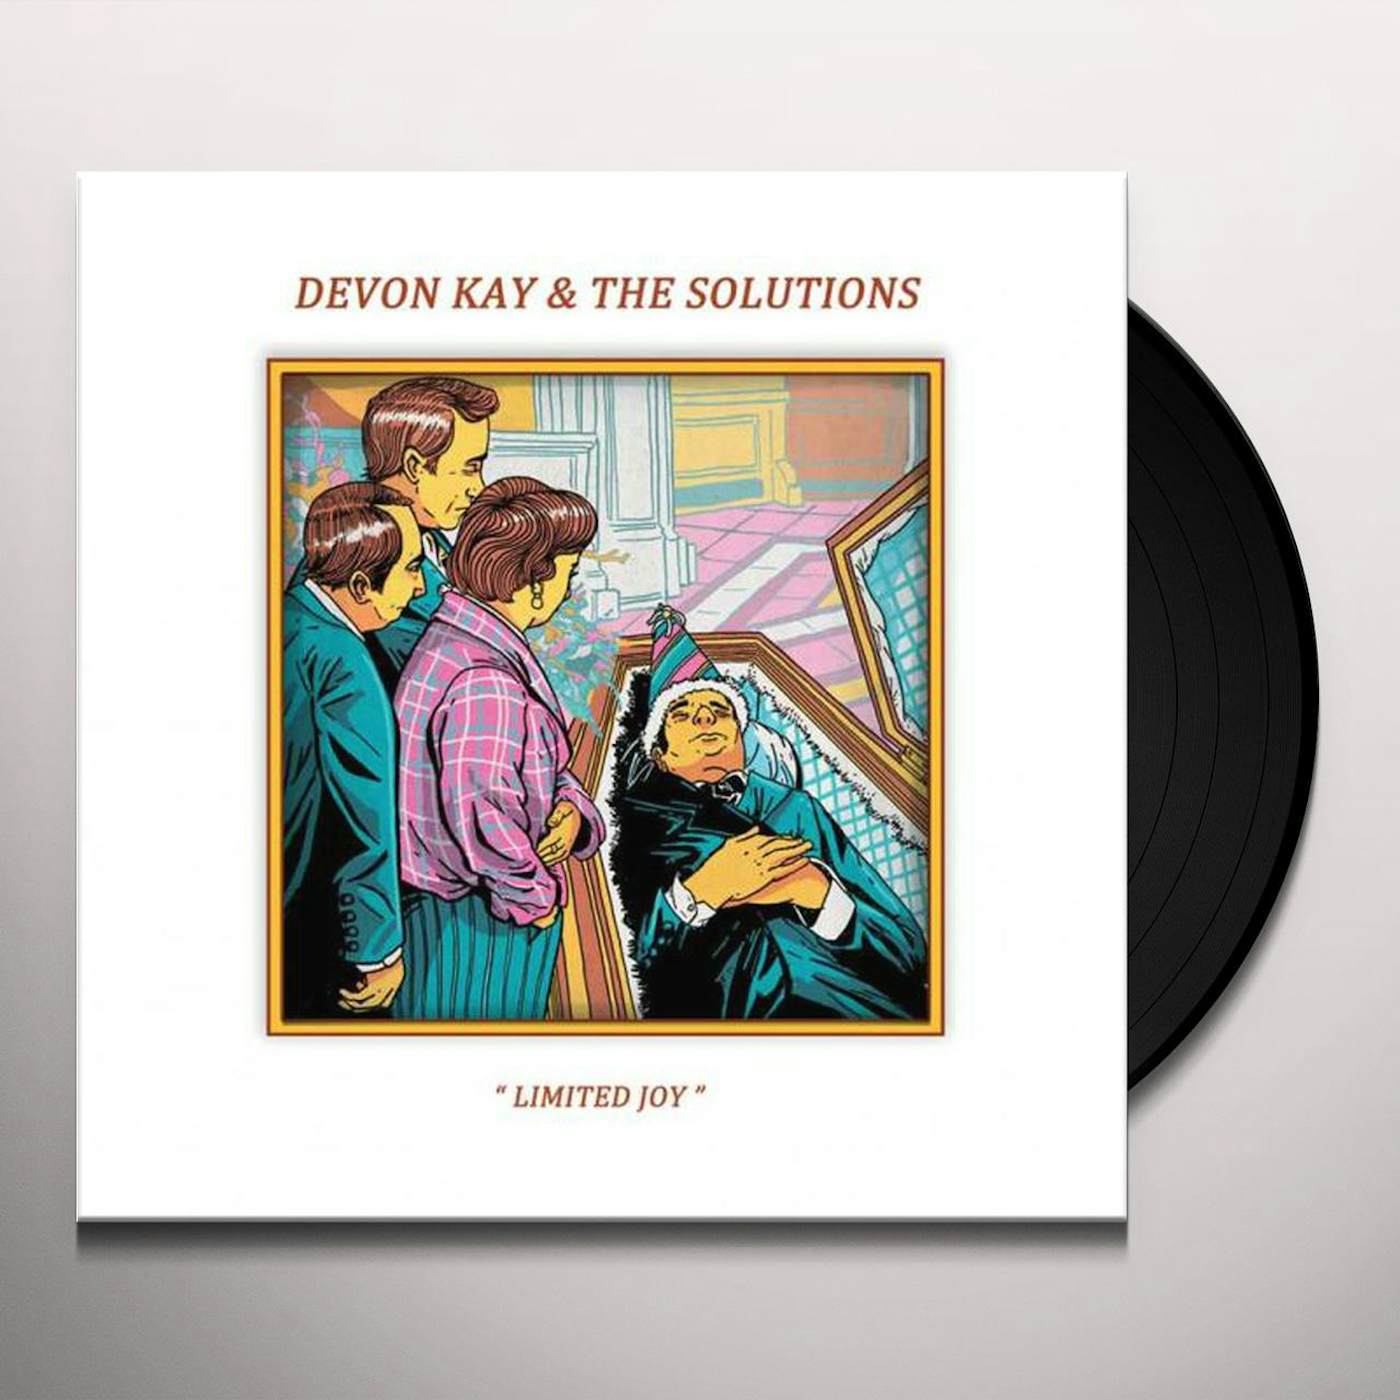 Oh Glorious Nothing  Devon Kay & the Solutions